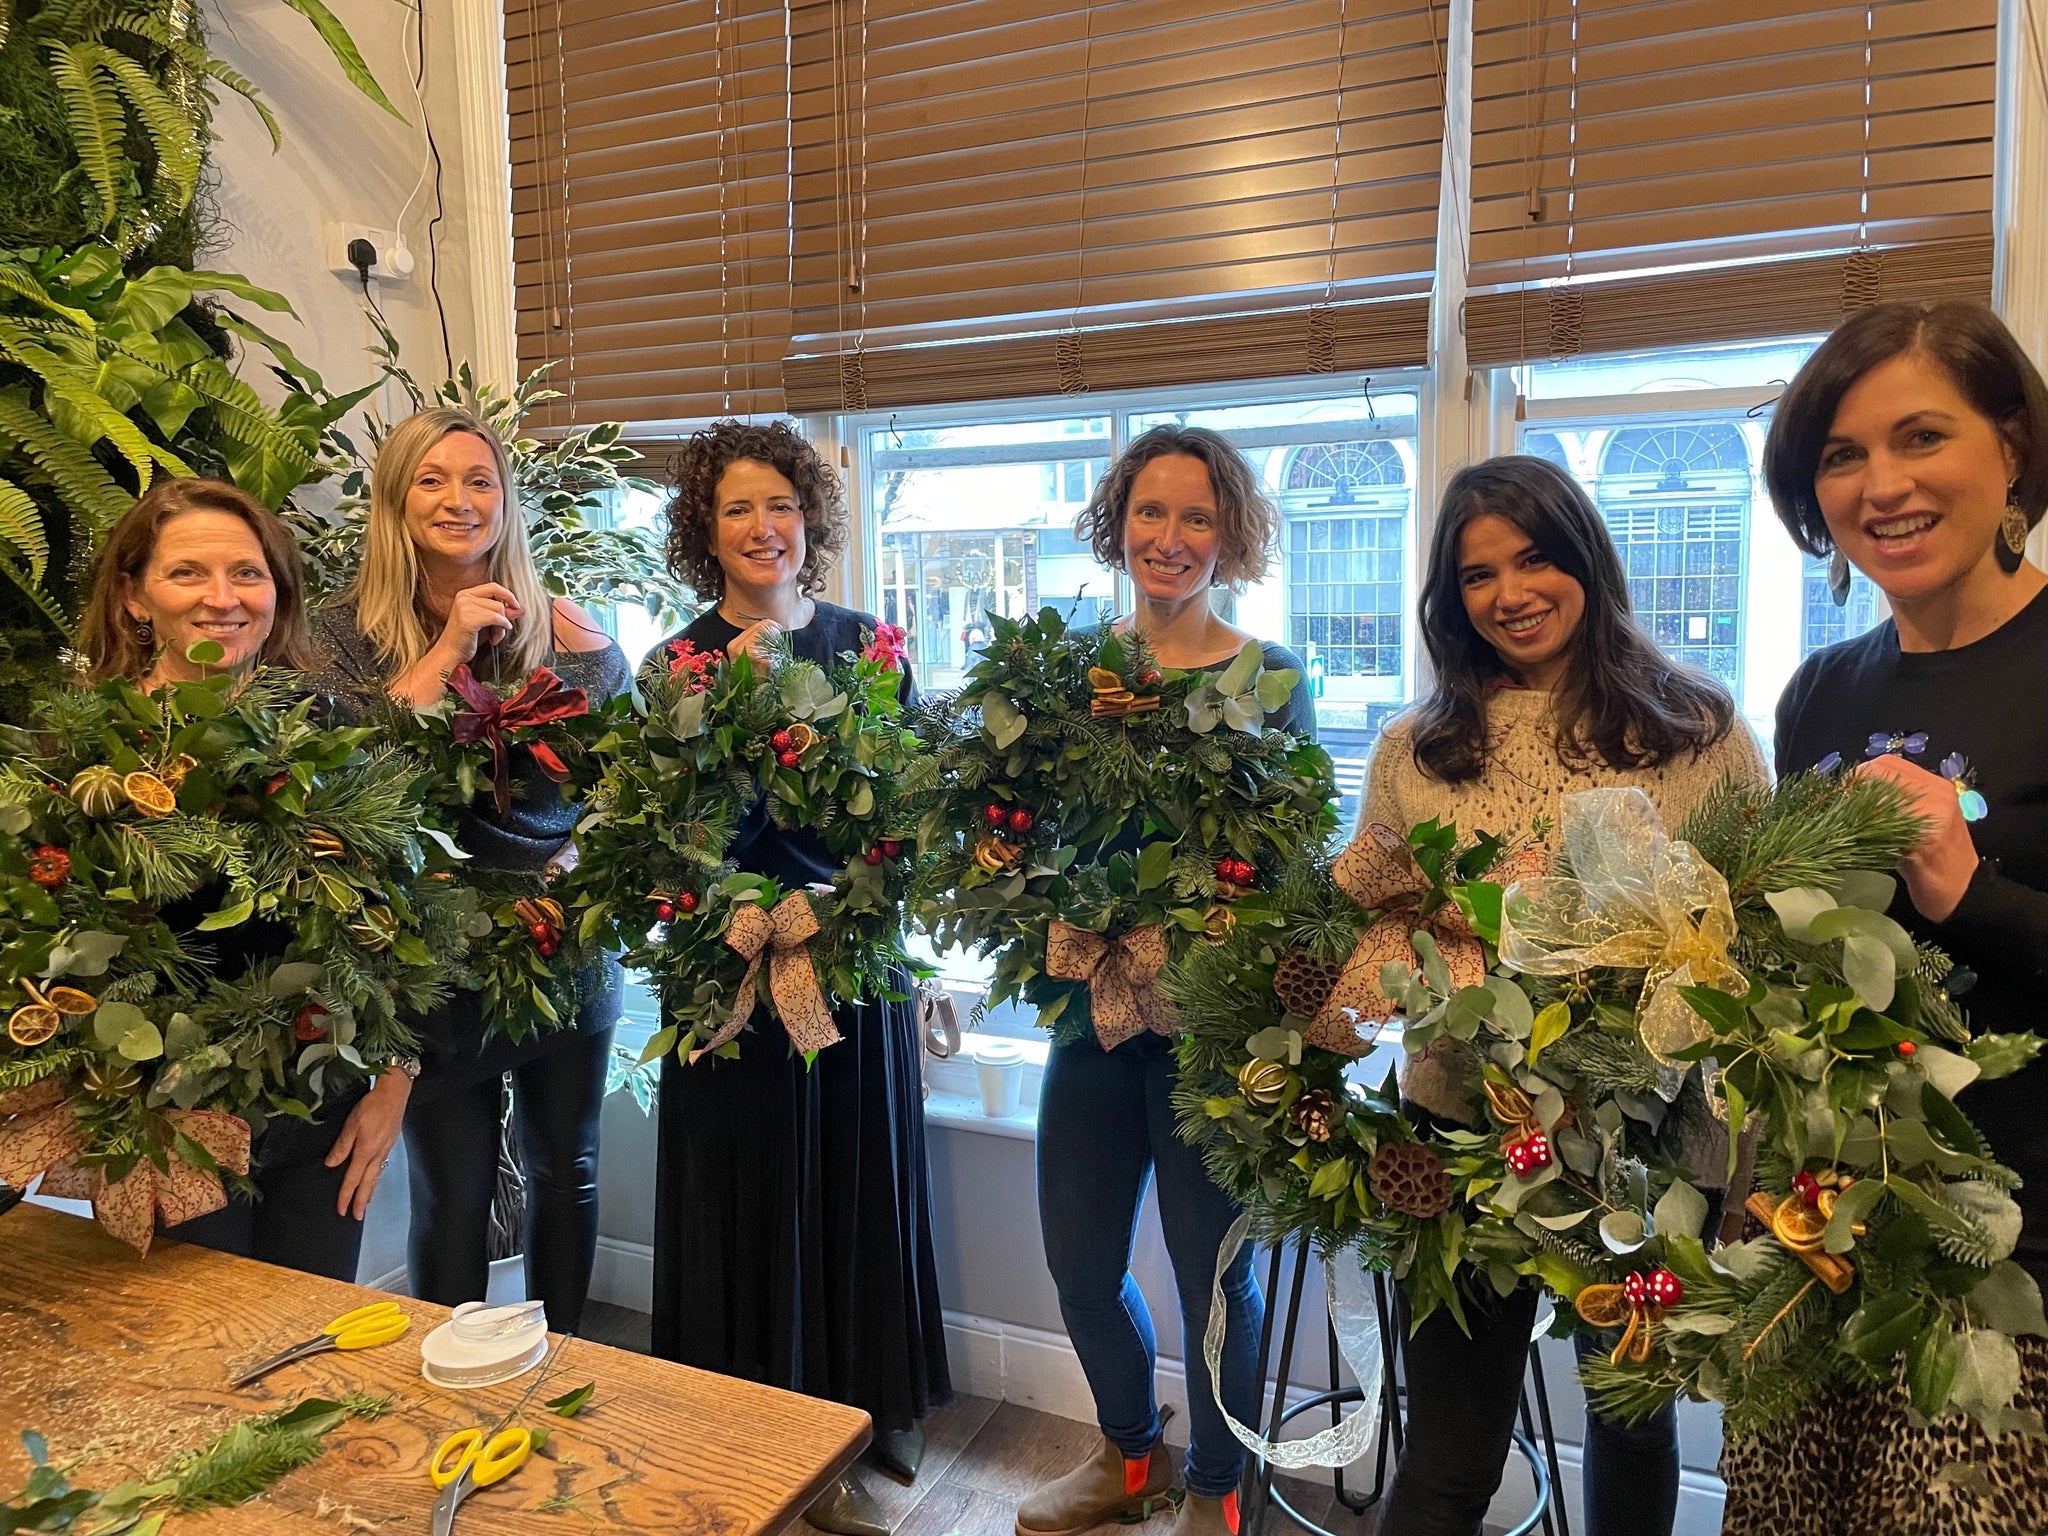 Christmas Wreath Workshop – Saturday 25th November, Starting @ 3pm (£75 per person) 2.5 hours